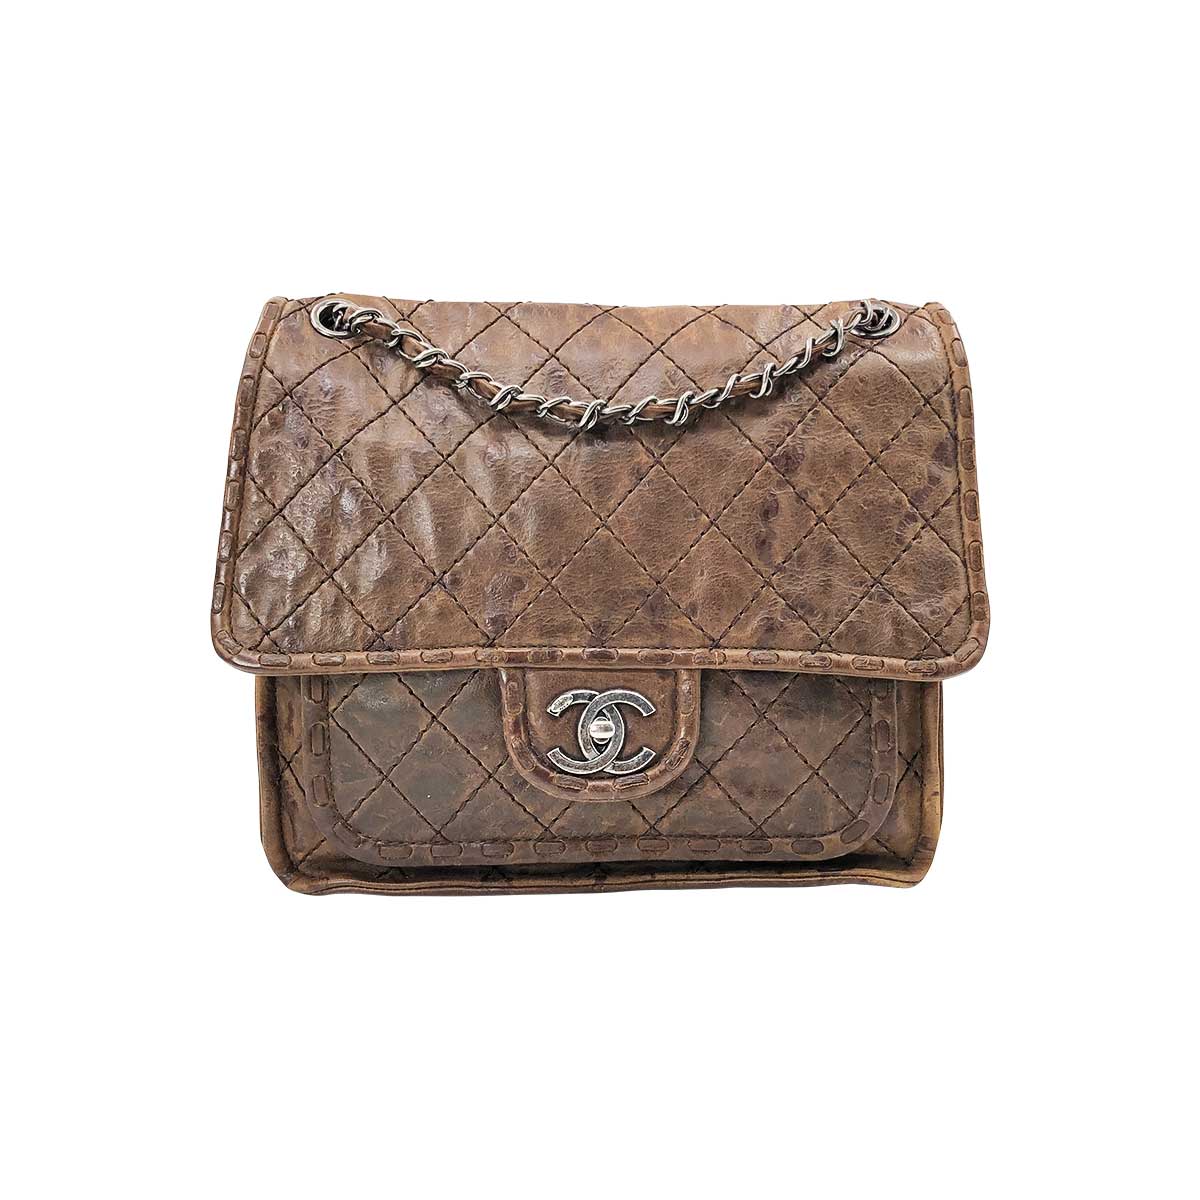 Chanel 2010s flap bag in brown mottled & quilted leather